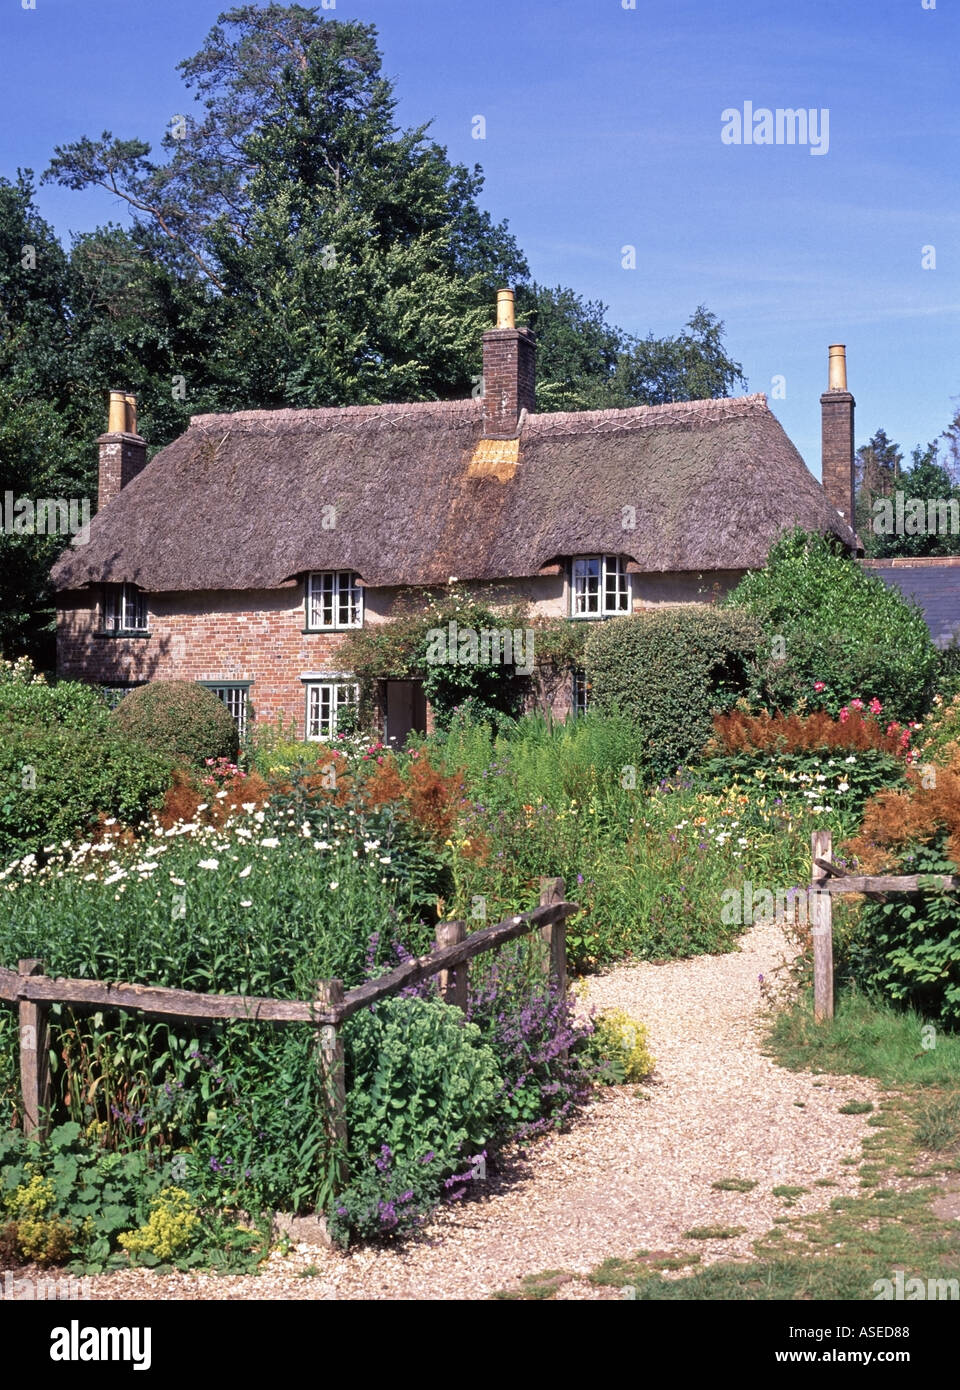 Summer view of historical thatched roof cottage home and garden at Thomas Hardy birthplace of famous English author in Bockhampton Dorset England UK Stock Photo